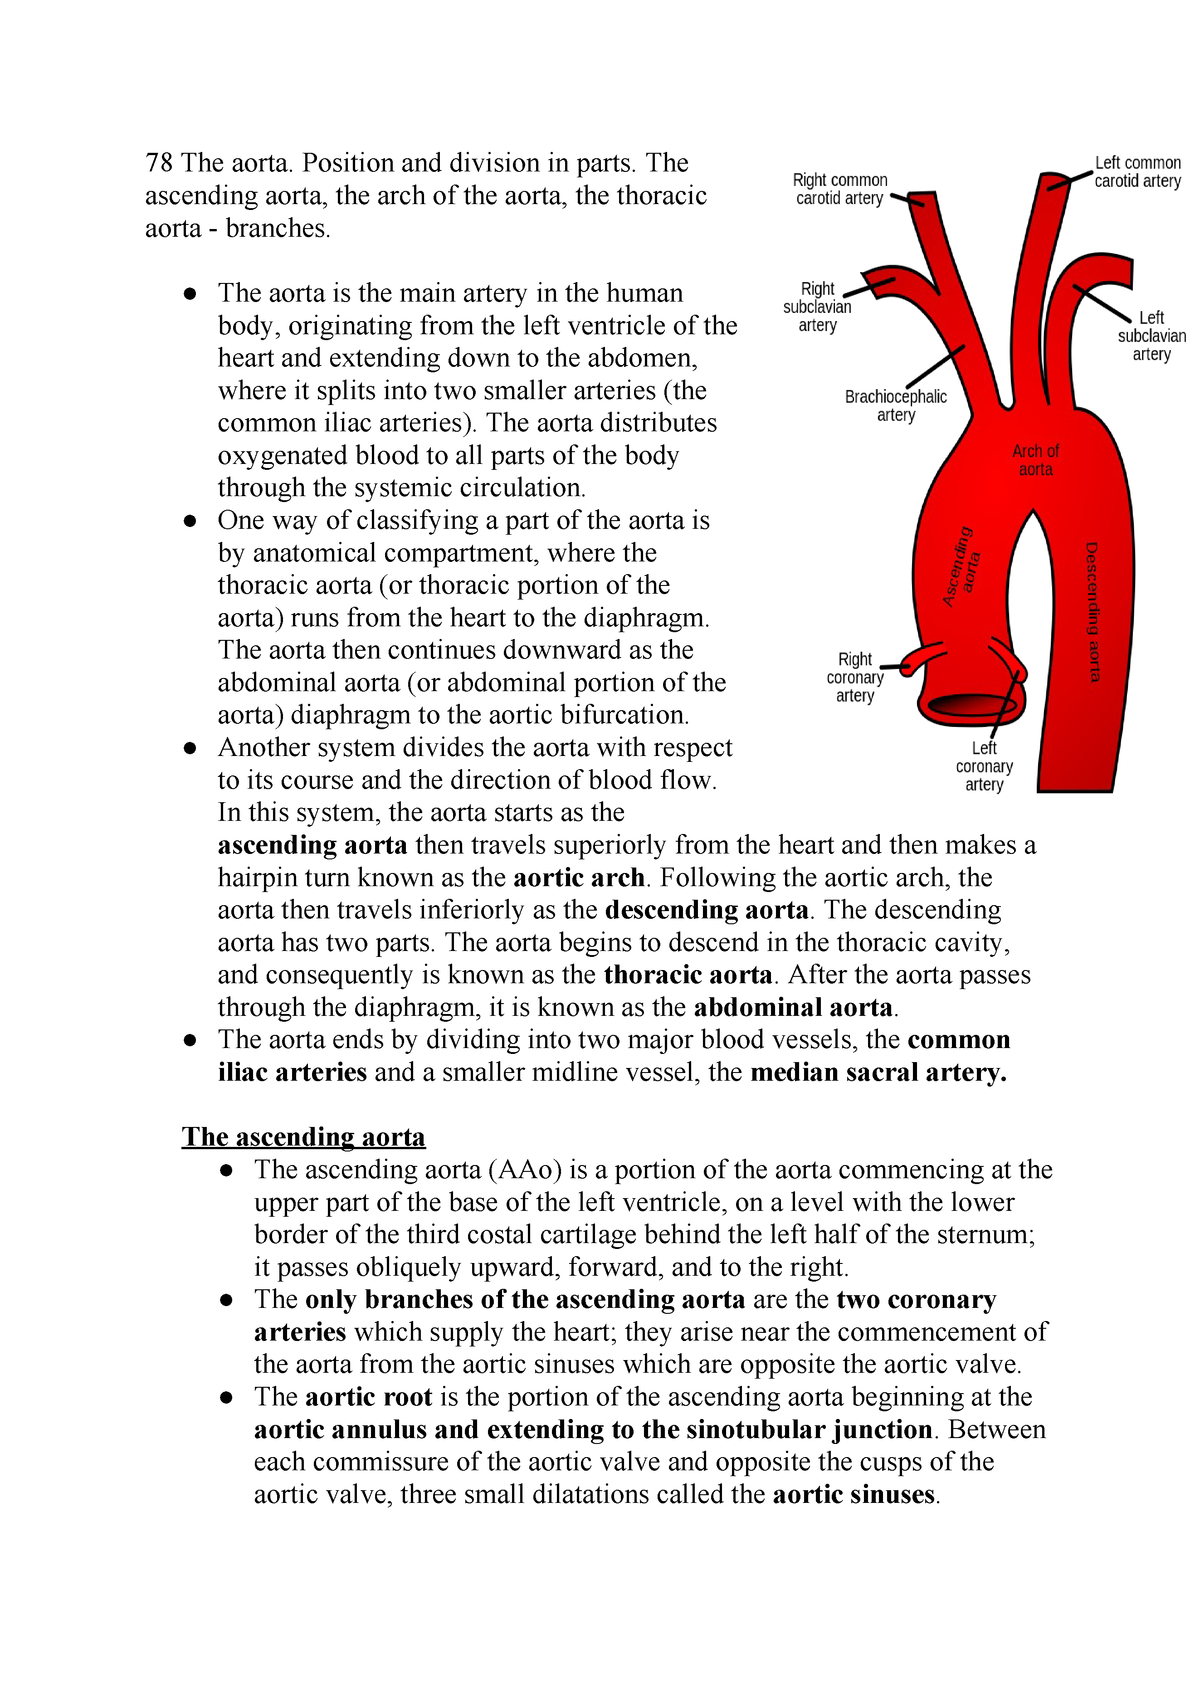 78 The Aorta Position And Division In Parts The Ascending Aorta